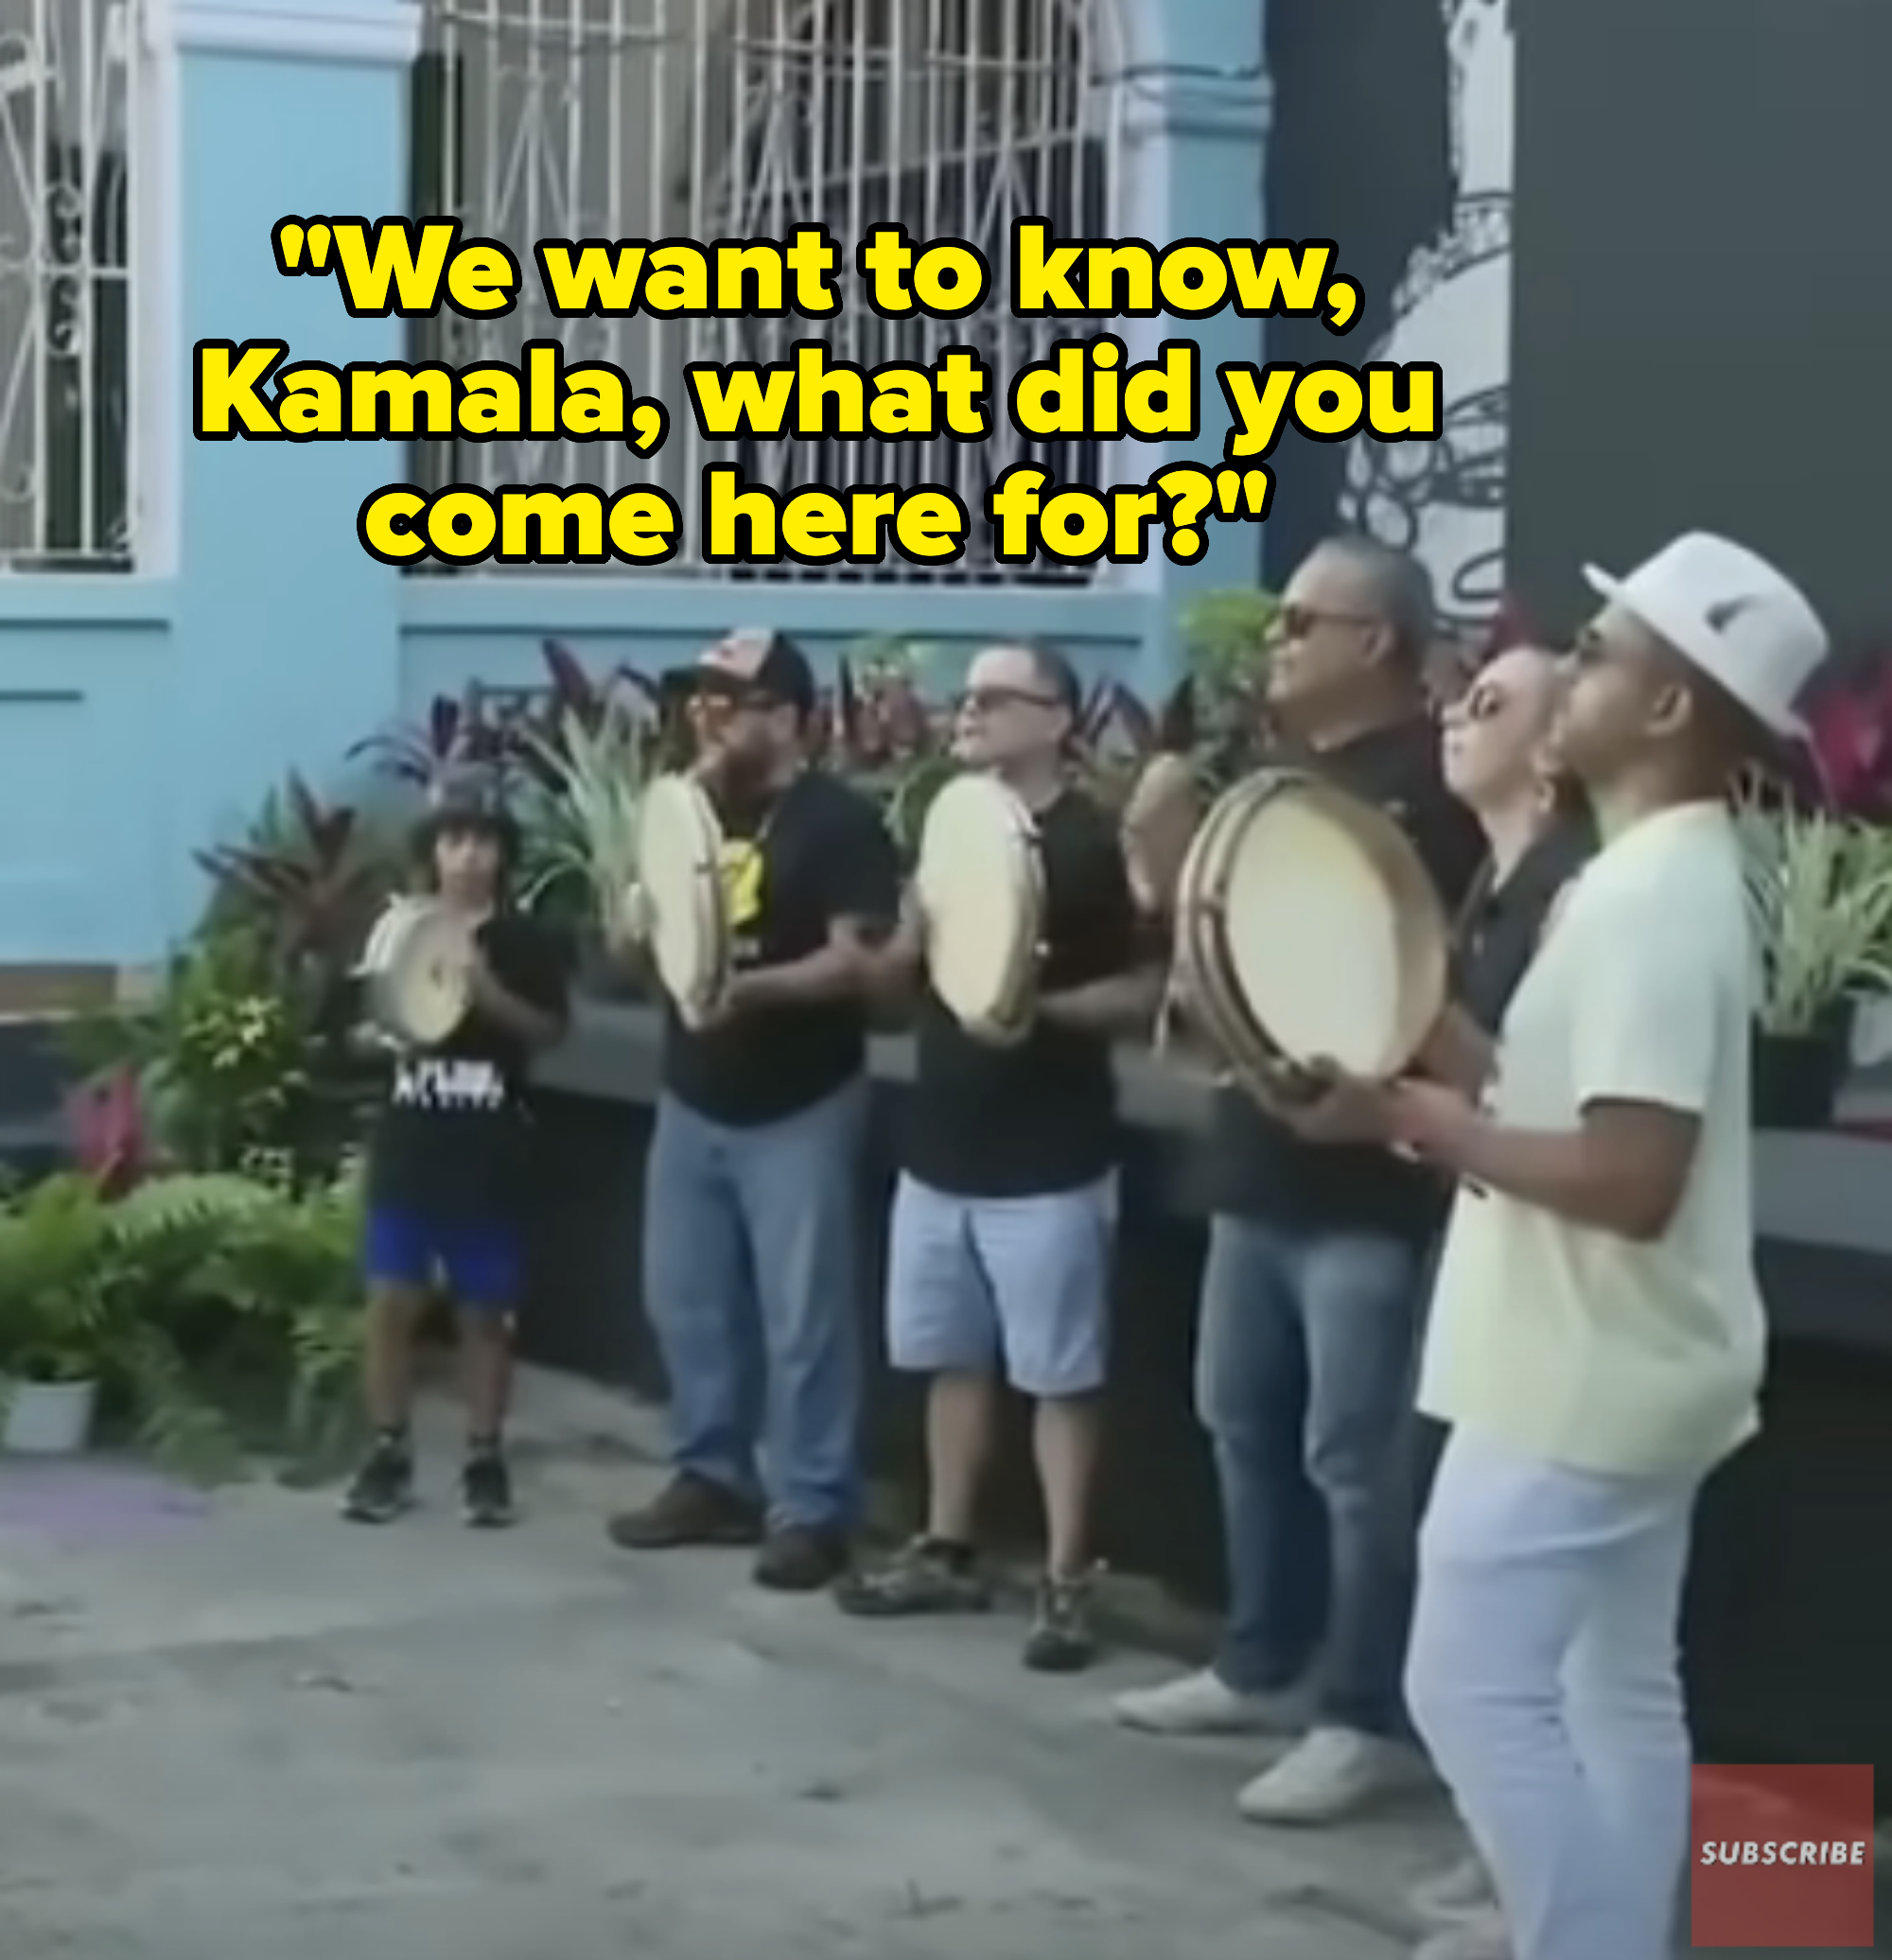 Group of people playing tambourines on a street